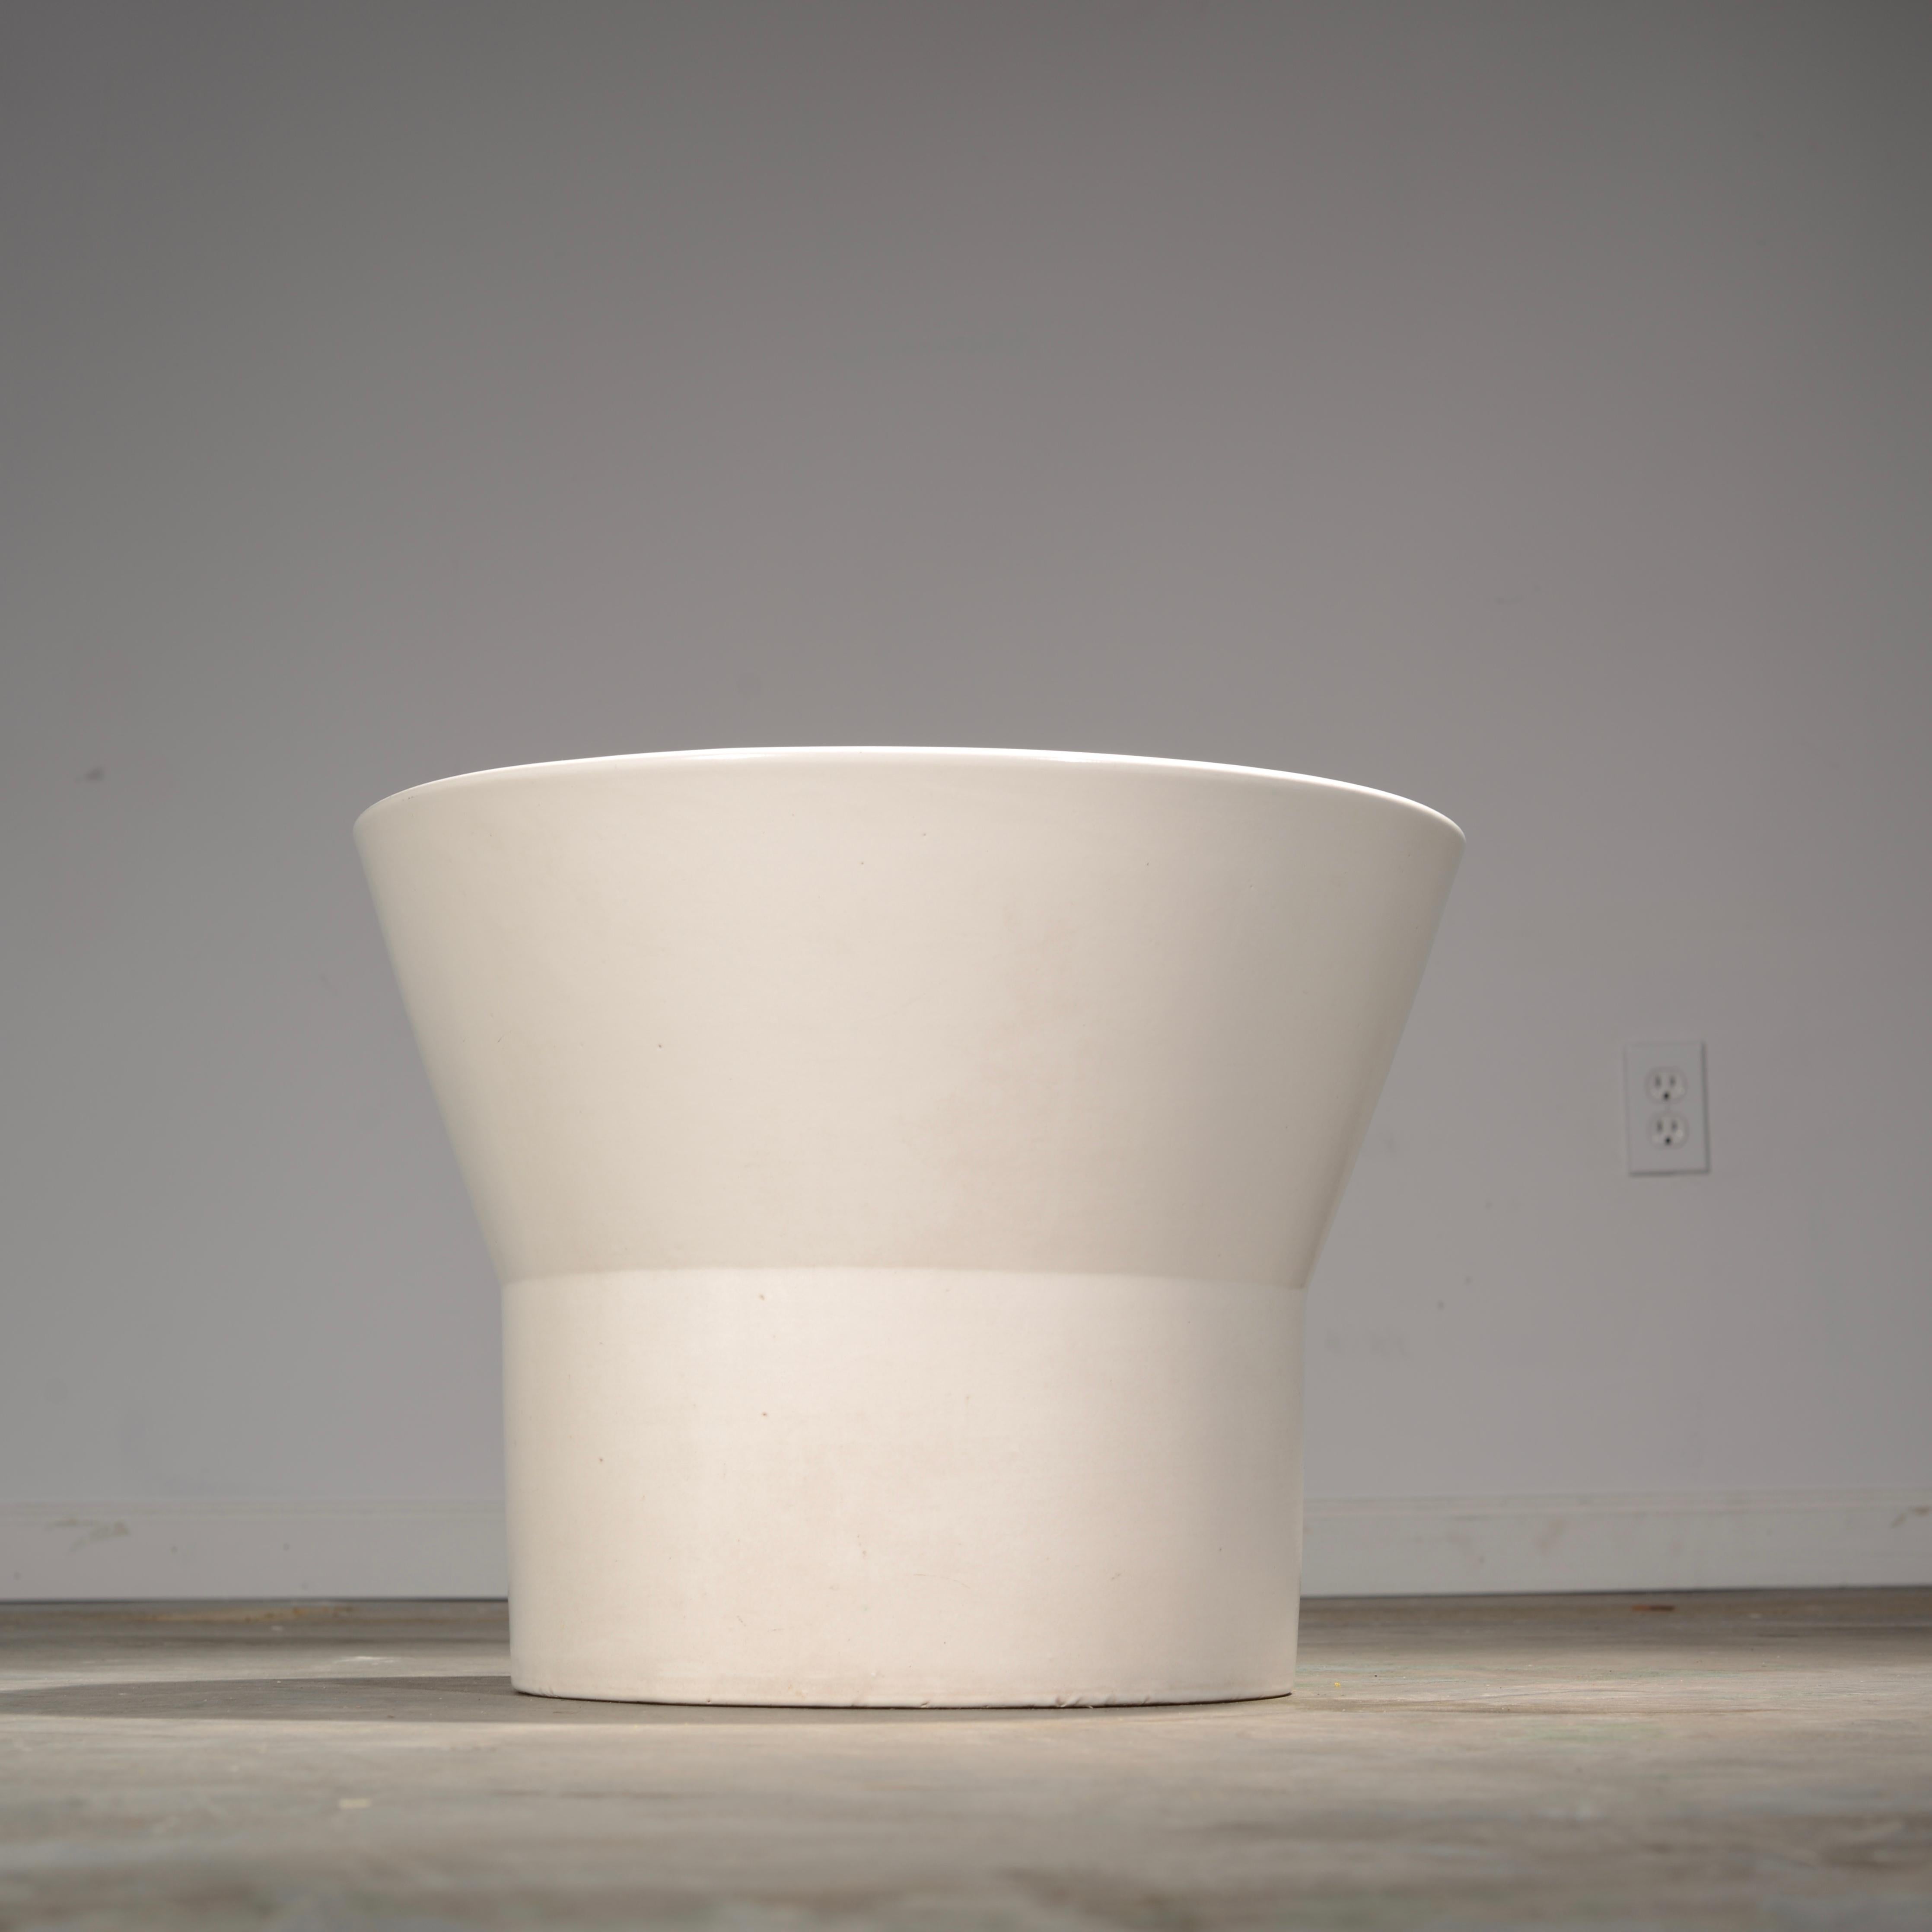 A rare white-glazed bisque planter designed by Paul McCobb for Architectural Pottery, 1964. This planter is in excellent condition with no evidence of prior use.